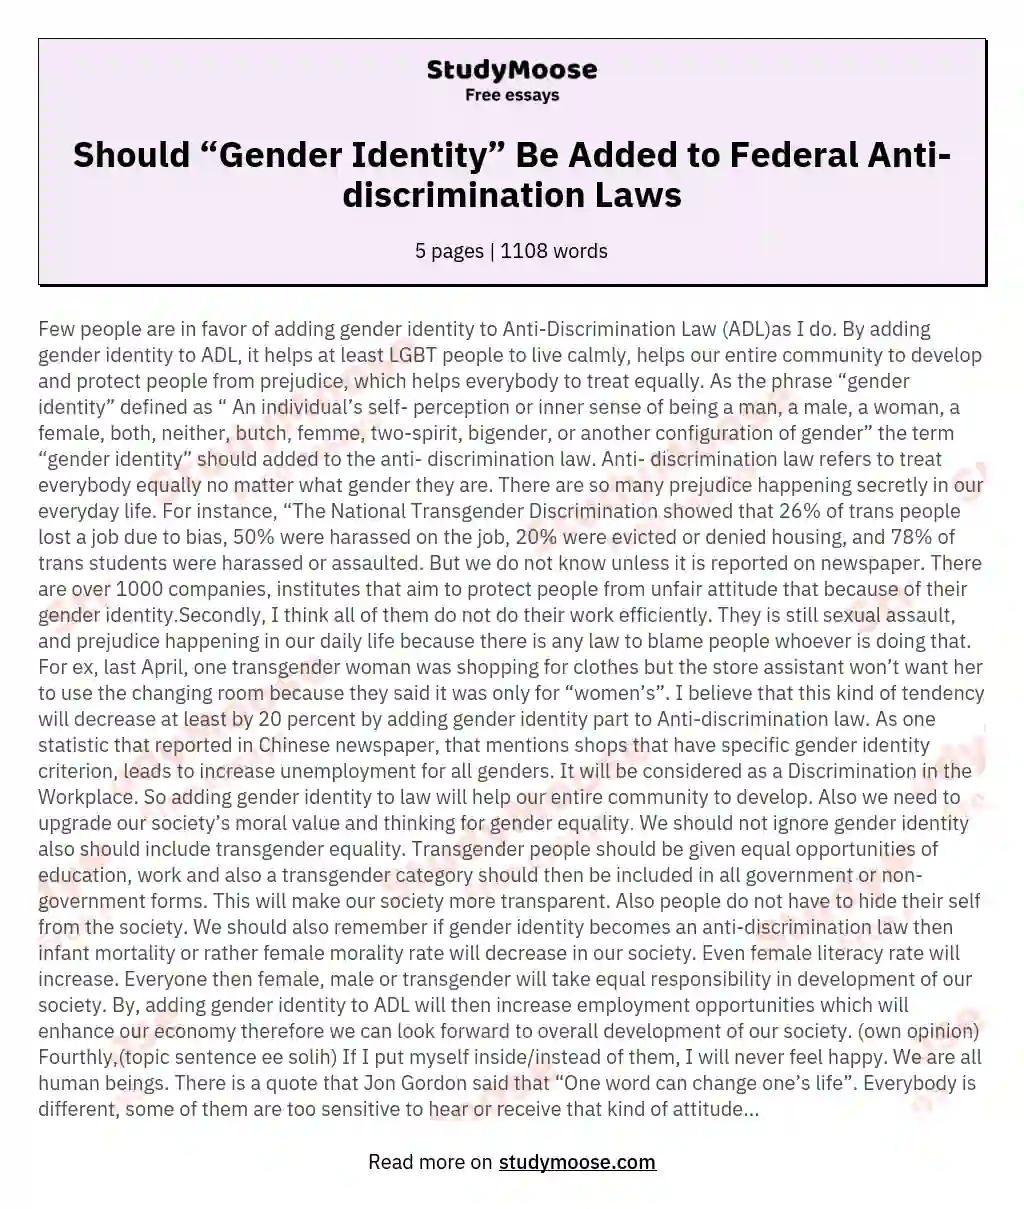 Should “Gender Identity” Be Added to Federal Anti-discrimination Laws essay